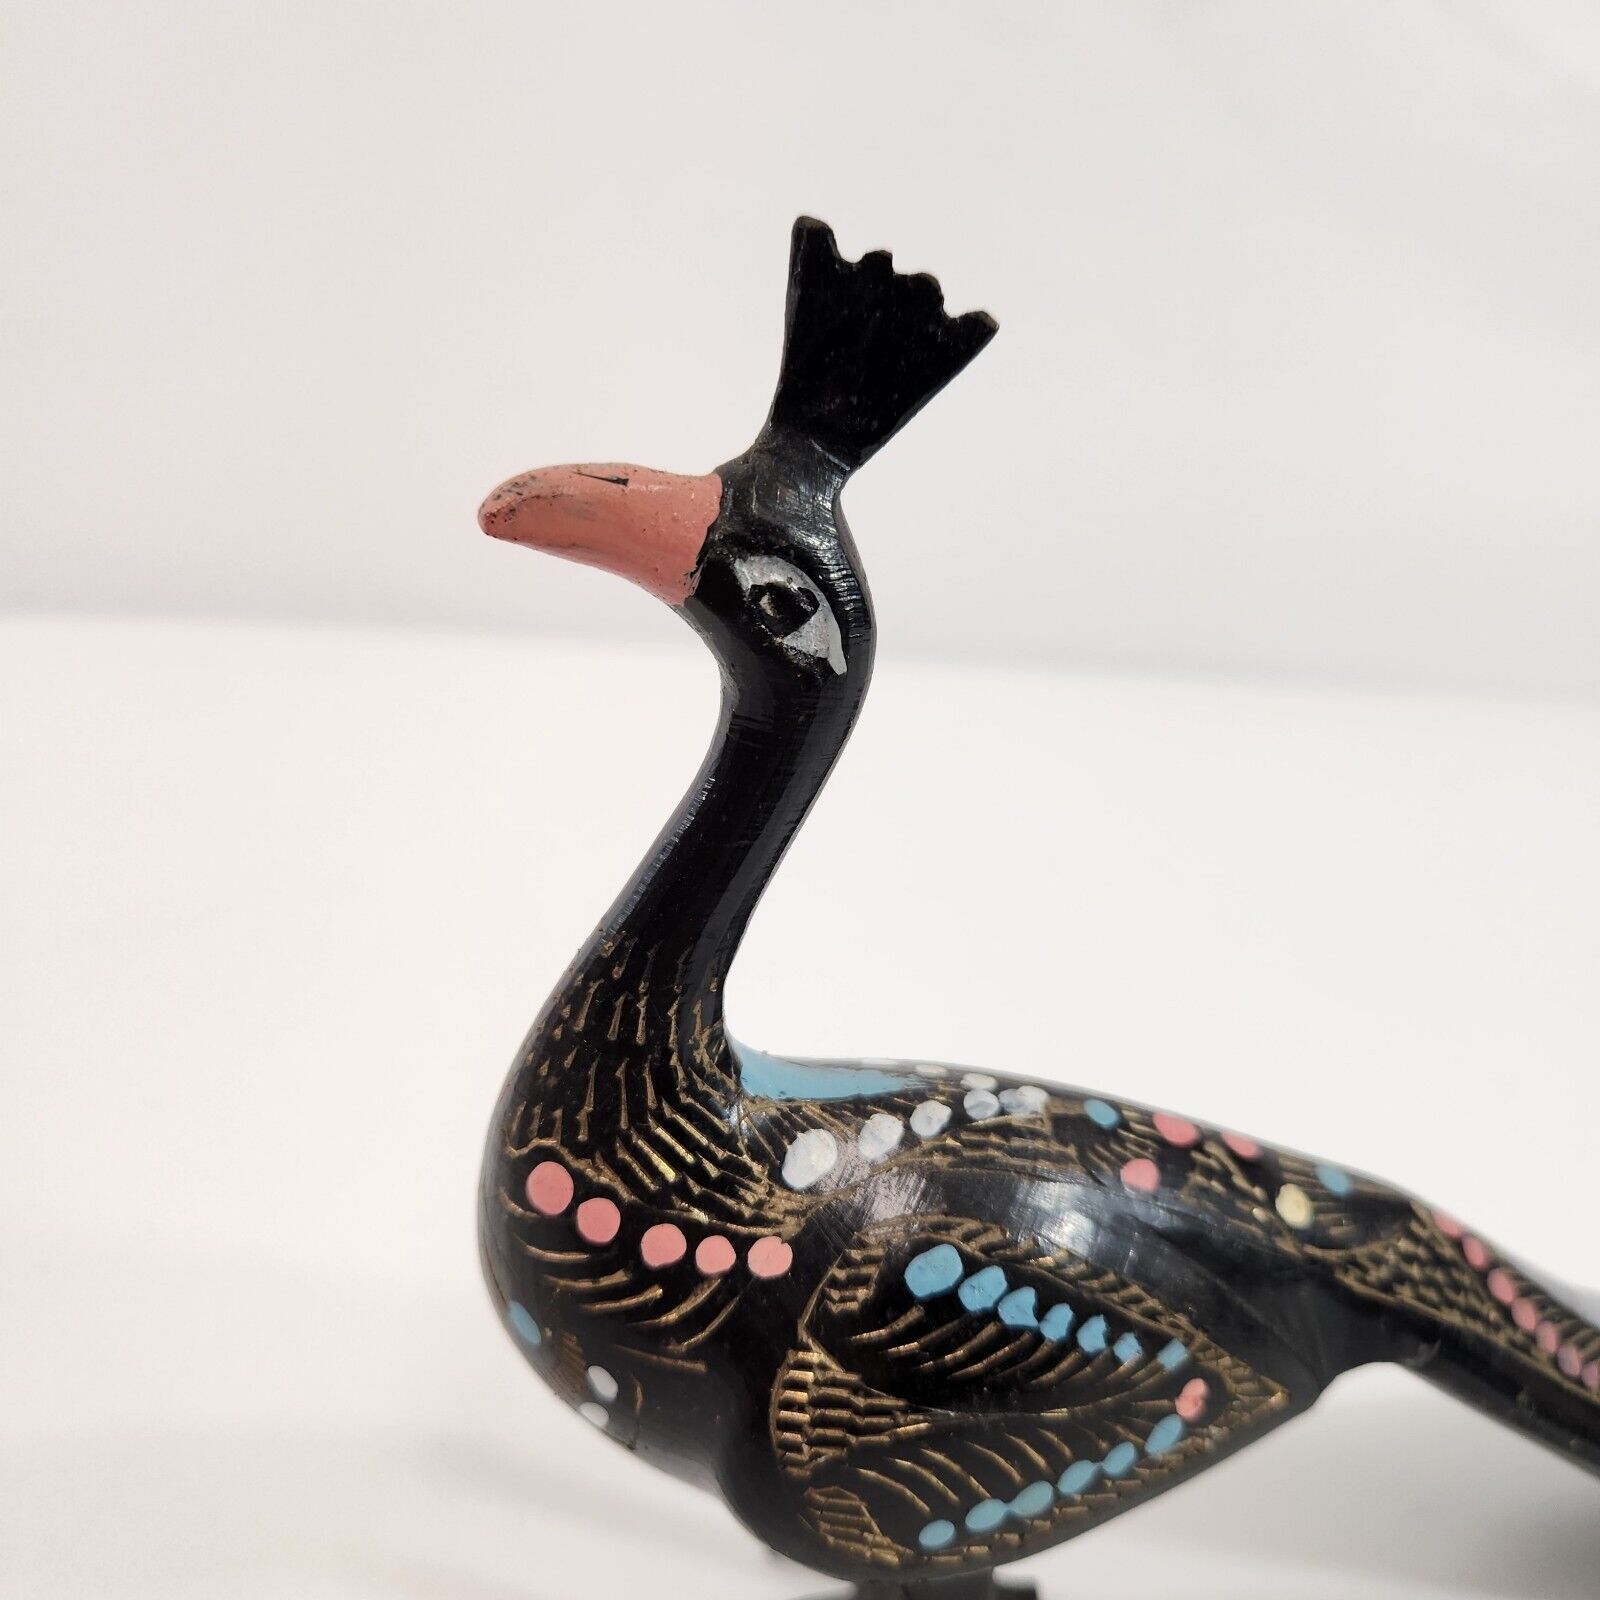 Primary image for Painted Brass Peacock Figurine Metal Sculpture Shoehorn Handmade Black 9" Vtg